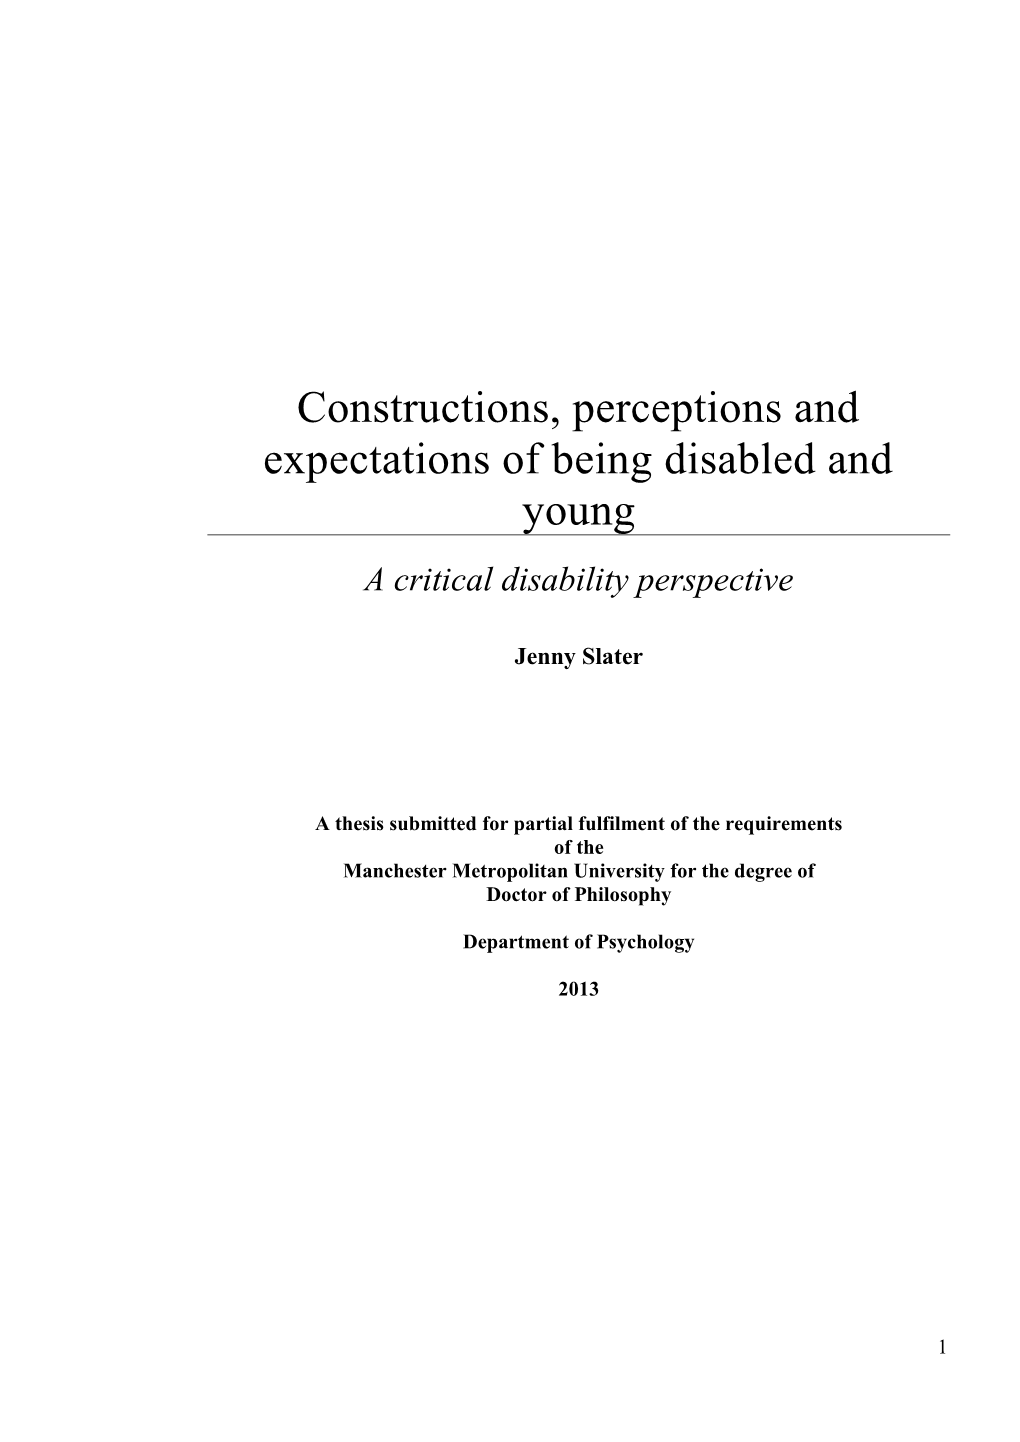 Constructions, Perceptions and Expectations of Being Disabled and Young